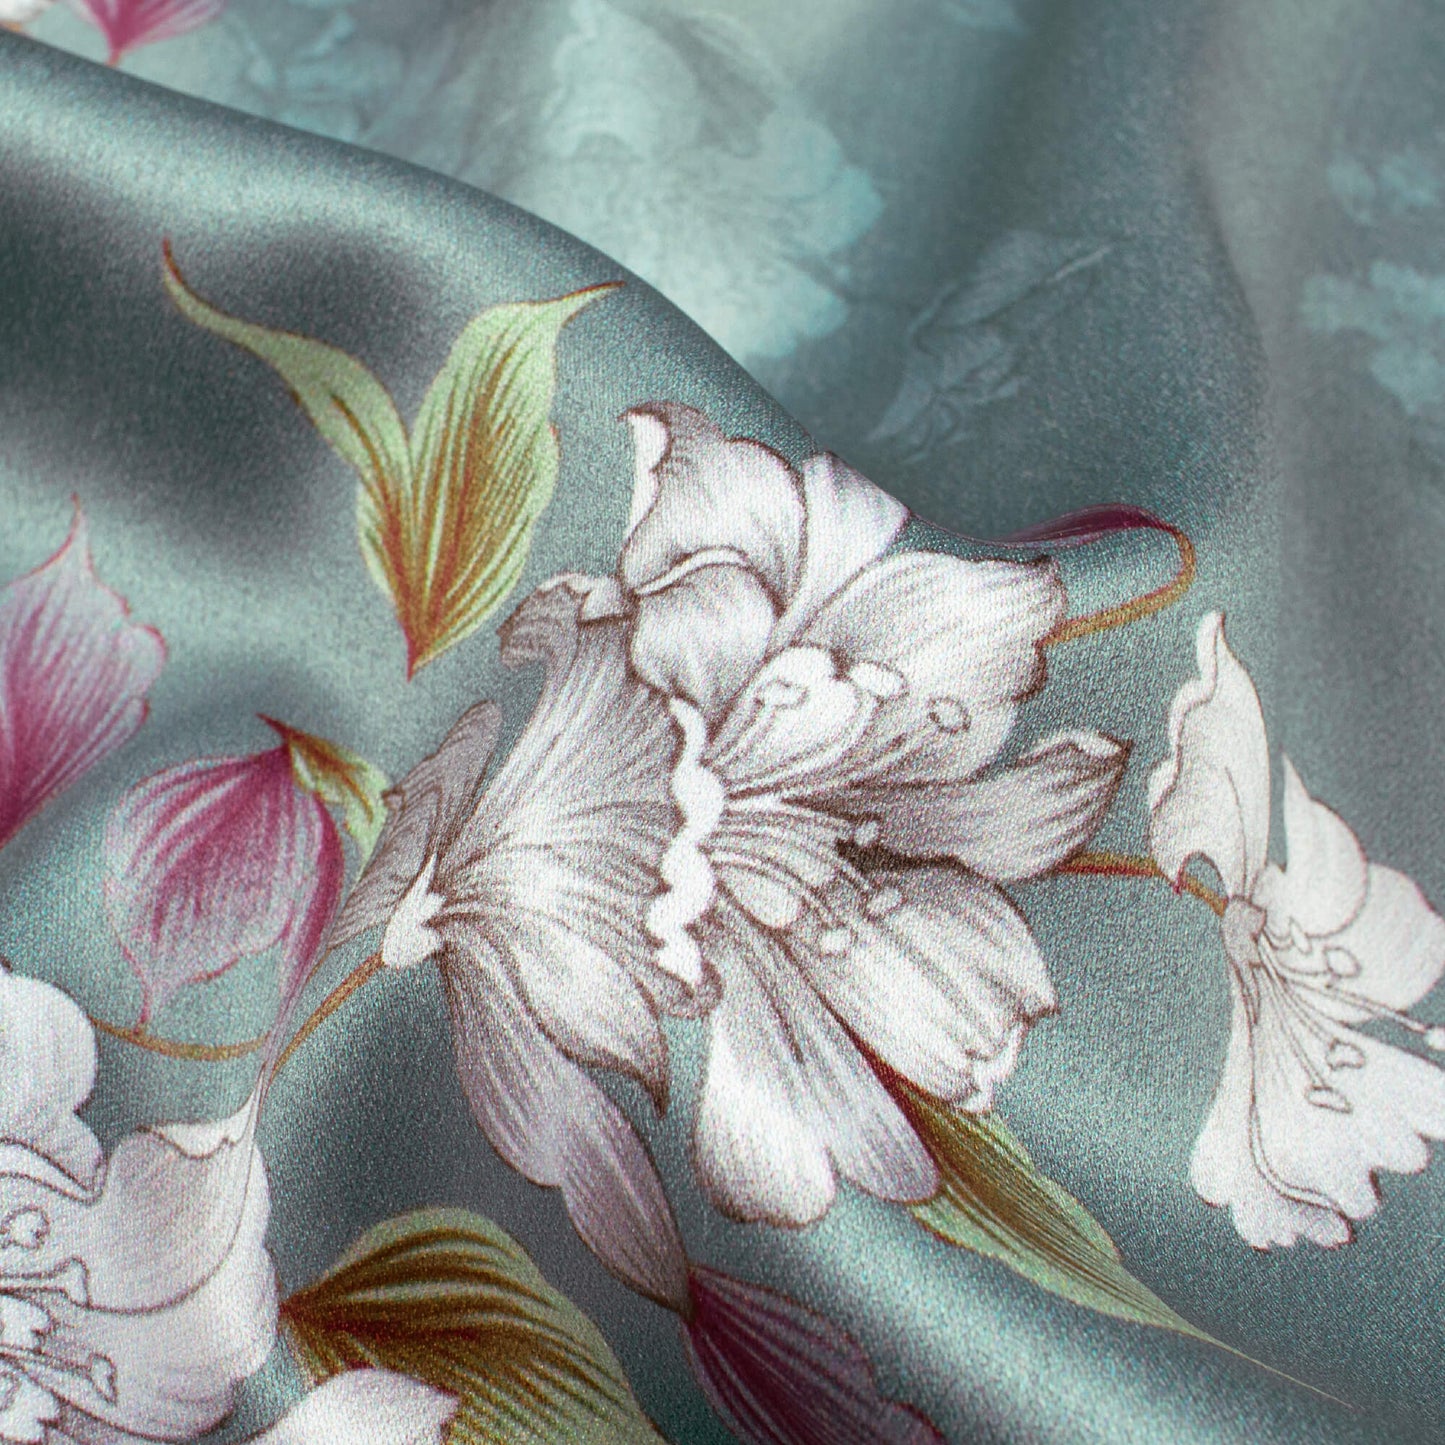 Diza's Choice Cadet Blue And White Floral Pattern Digital Print Charmeuse Satin Fabric (Width 58 Inches)